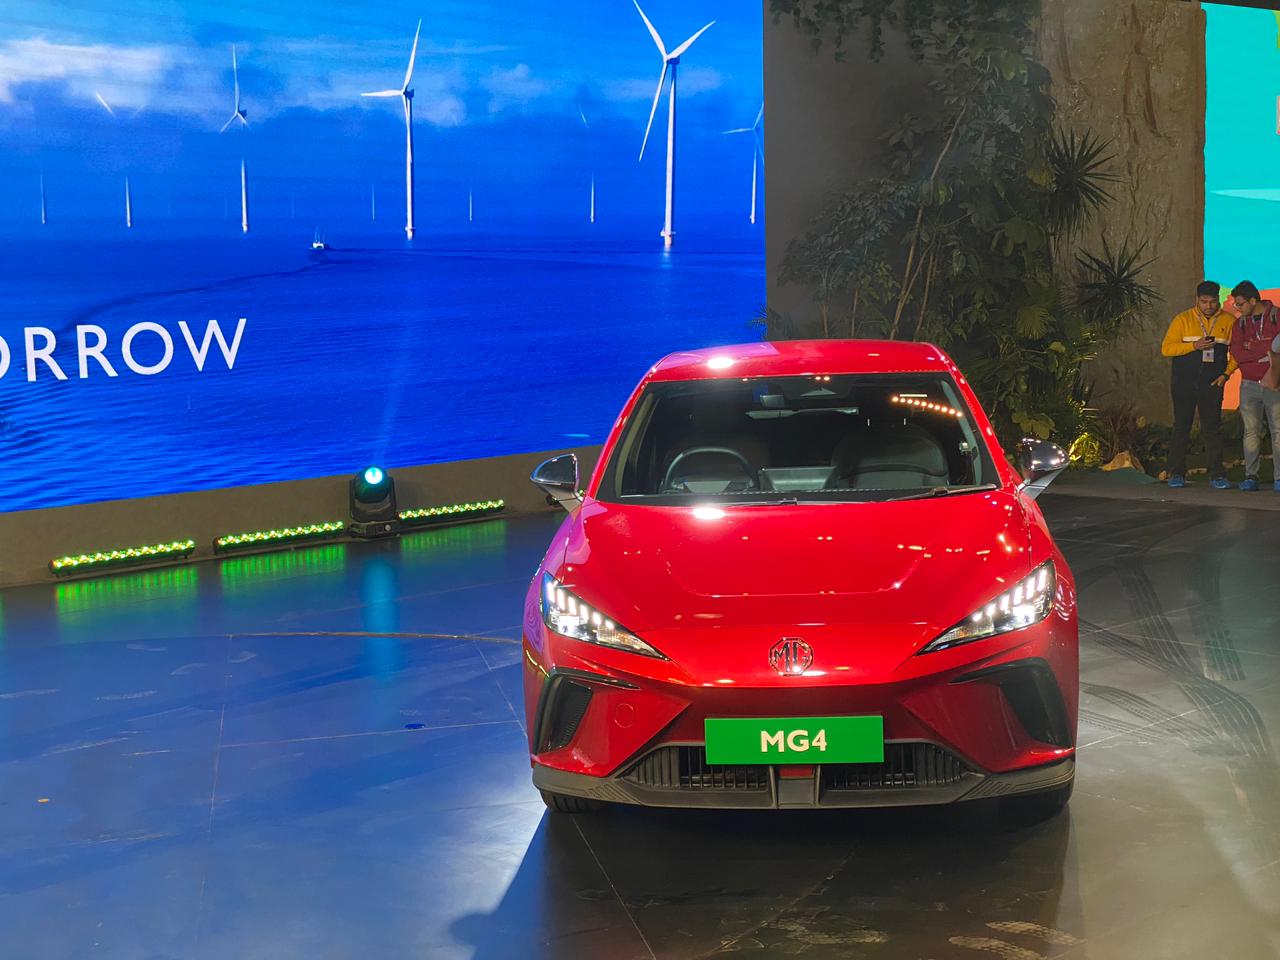 MG To Launch 7 New Models In The Next 2 Years In India